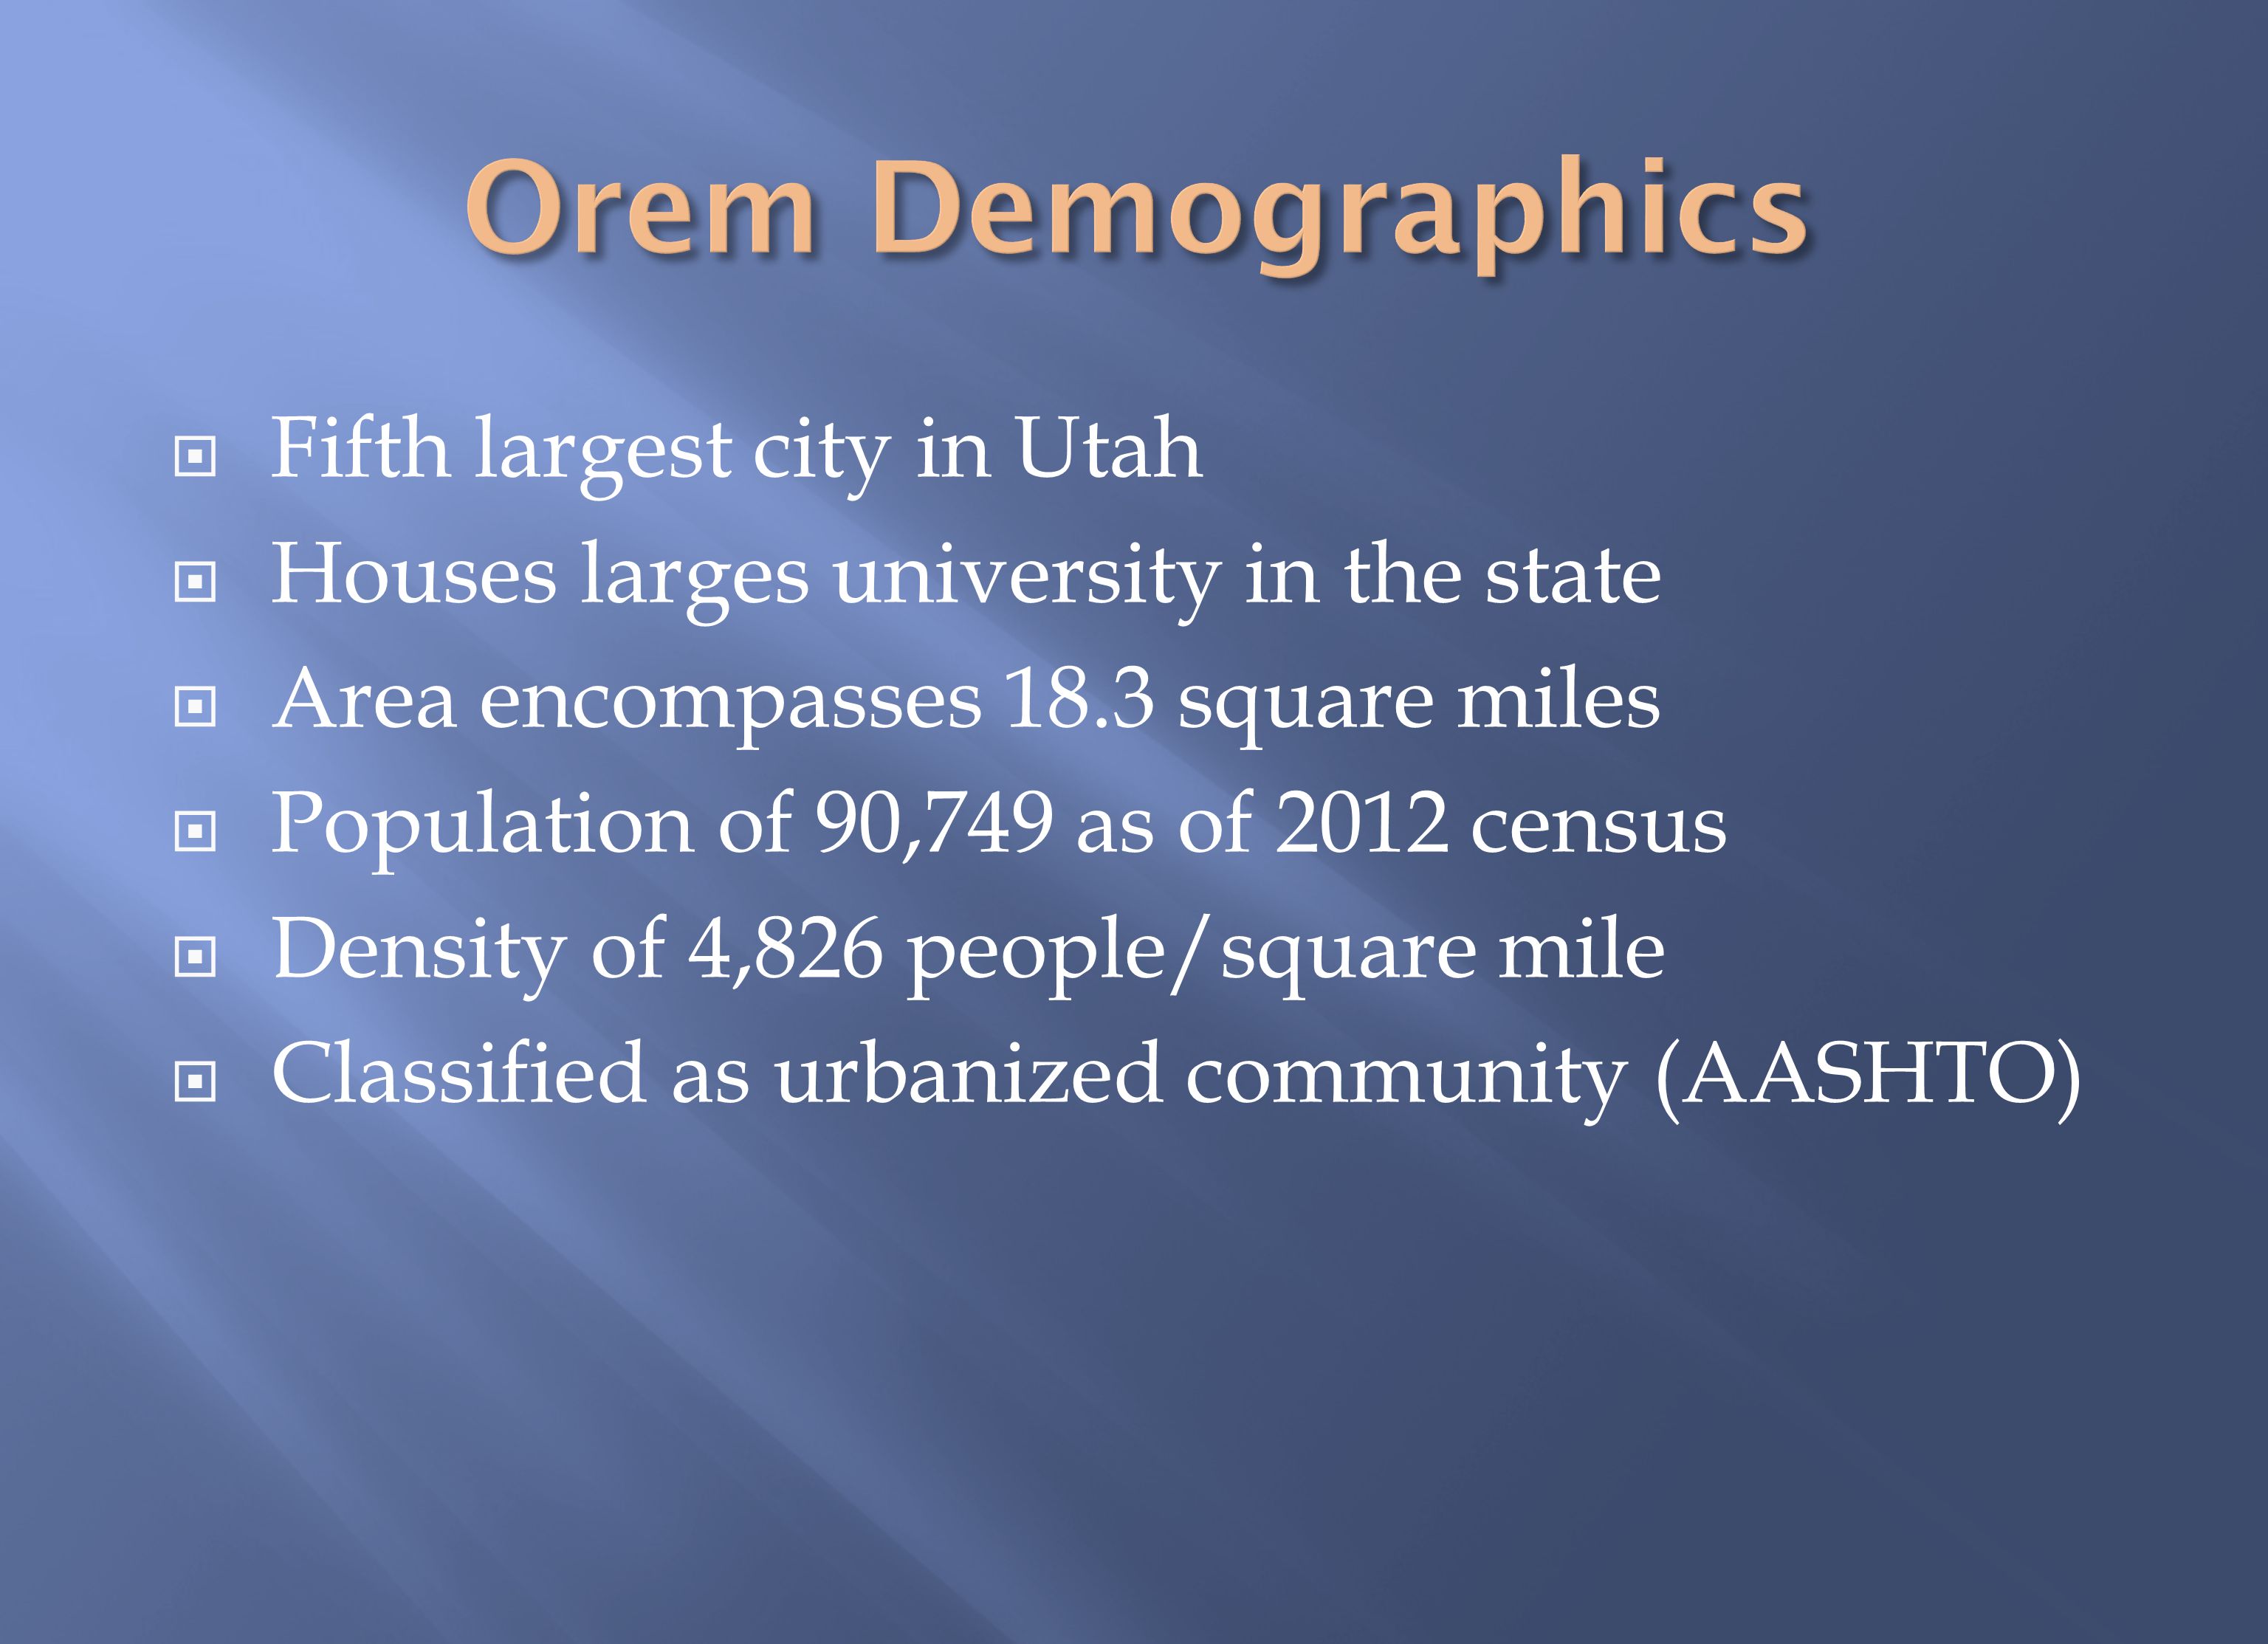  Fifth largest city in Utah  Houses larges university in the state  Area encompasses 18.3 square miles  Population of 90,749 as of 2012 census  Density of 4,826 people/square mile  Classified as urbanized community (AASHTO)